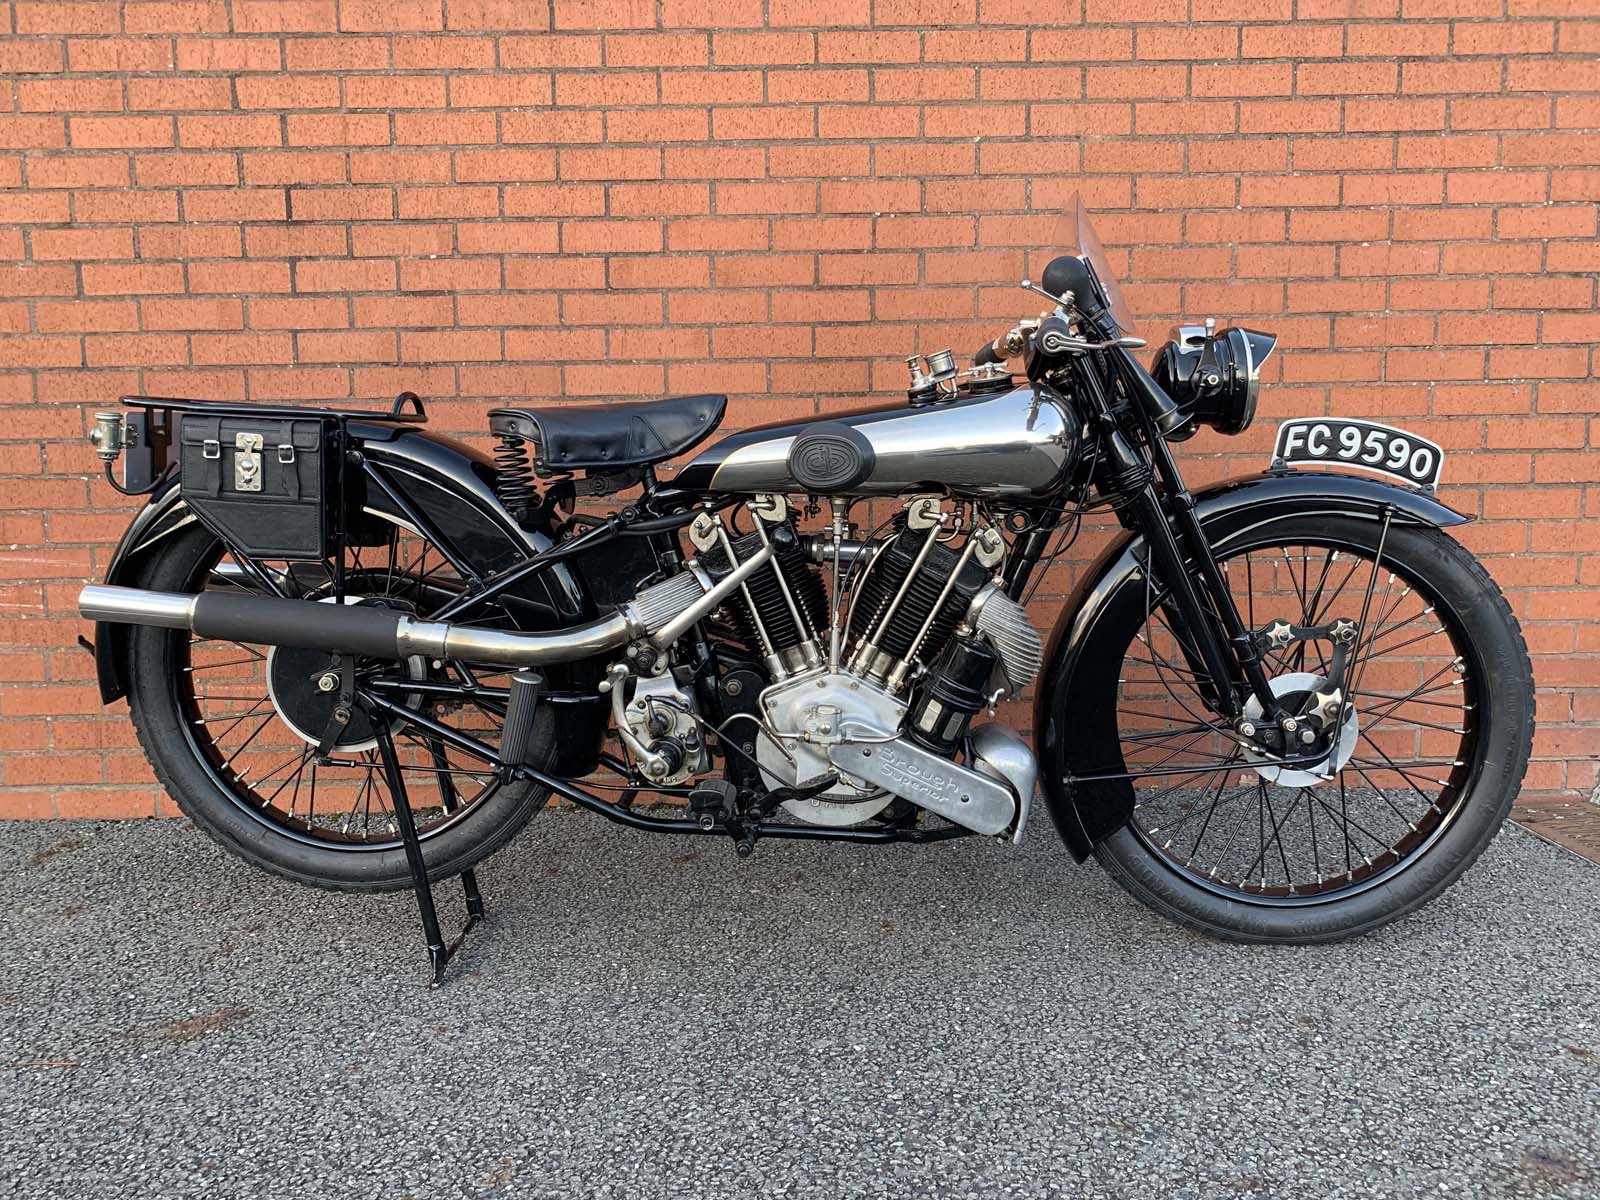 1925 Brough Superior SS100 Sells At Motorcycle Museum Auction For £184,000